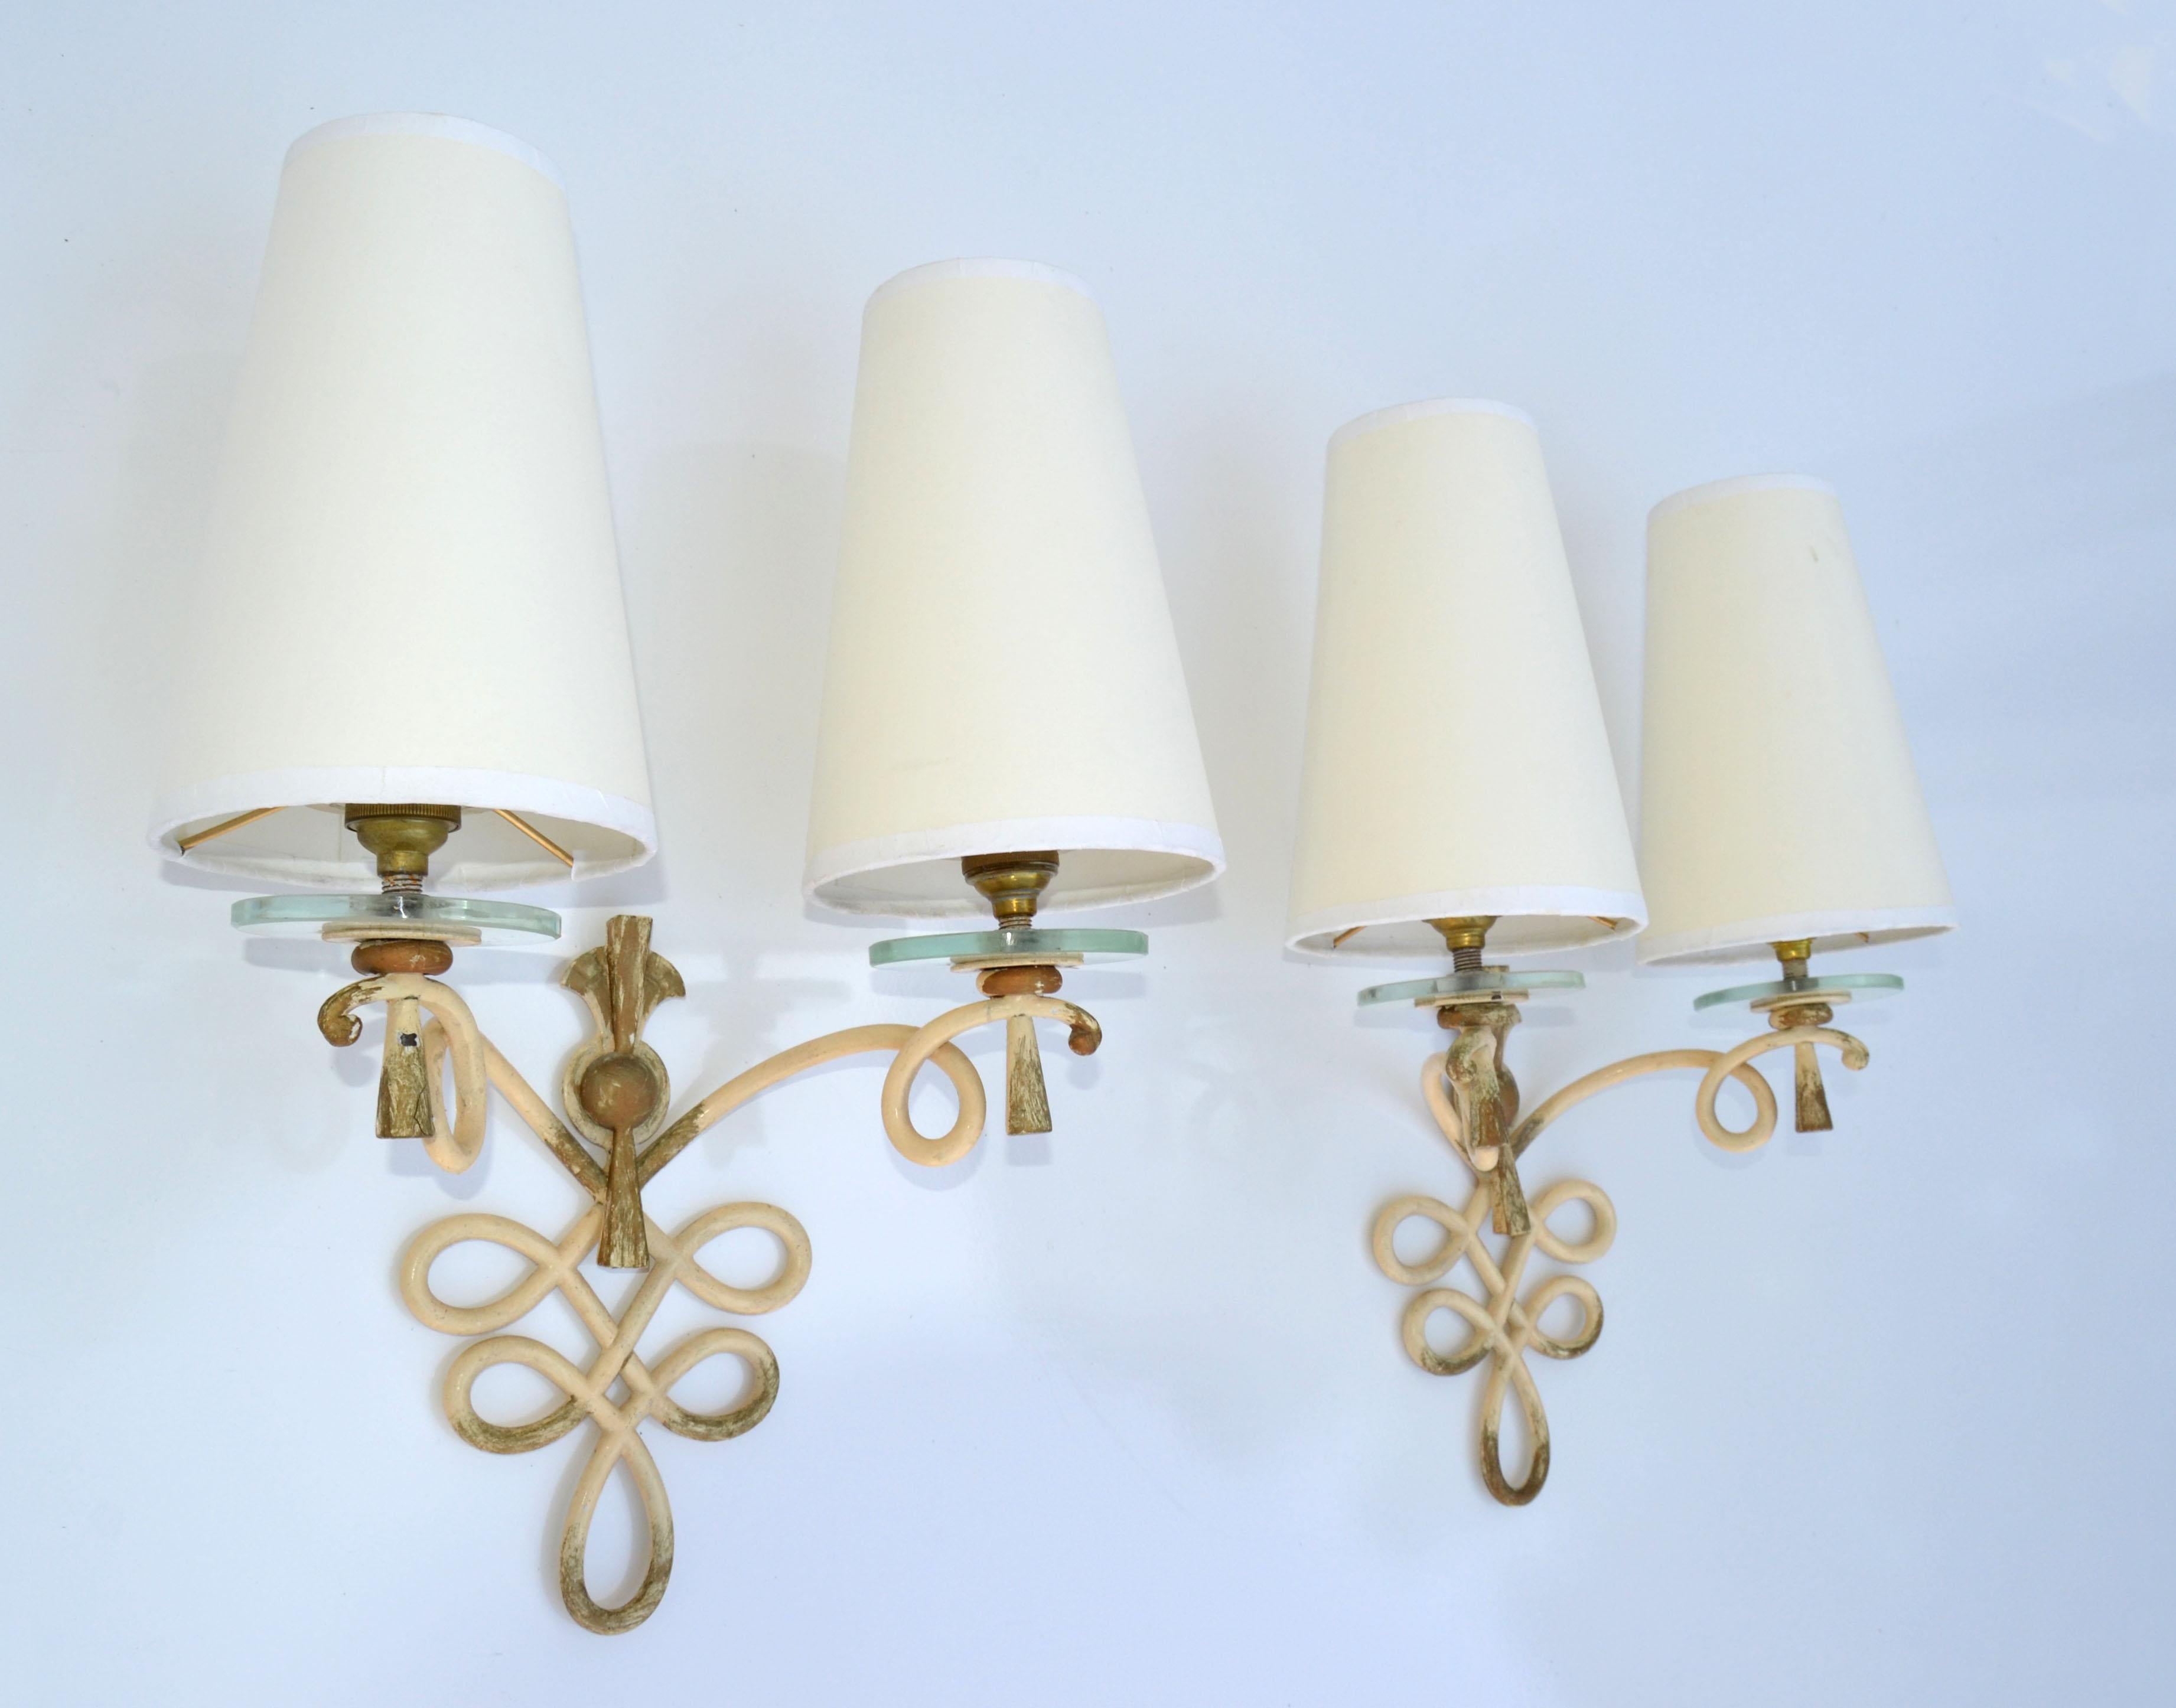 Hand-Crafted French Wrought Iron & Round Glass Sconces Cone Shades, Wall Lights Art Deco 1940 For Sale